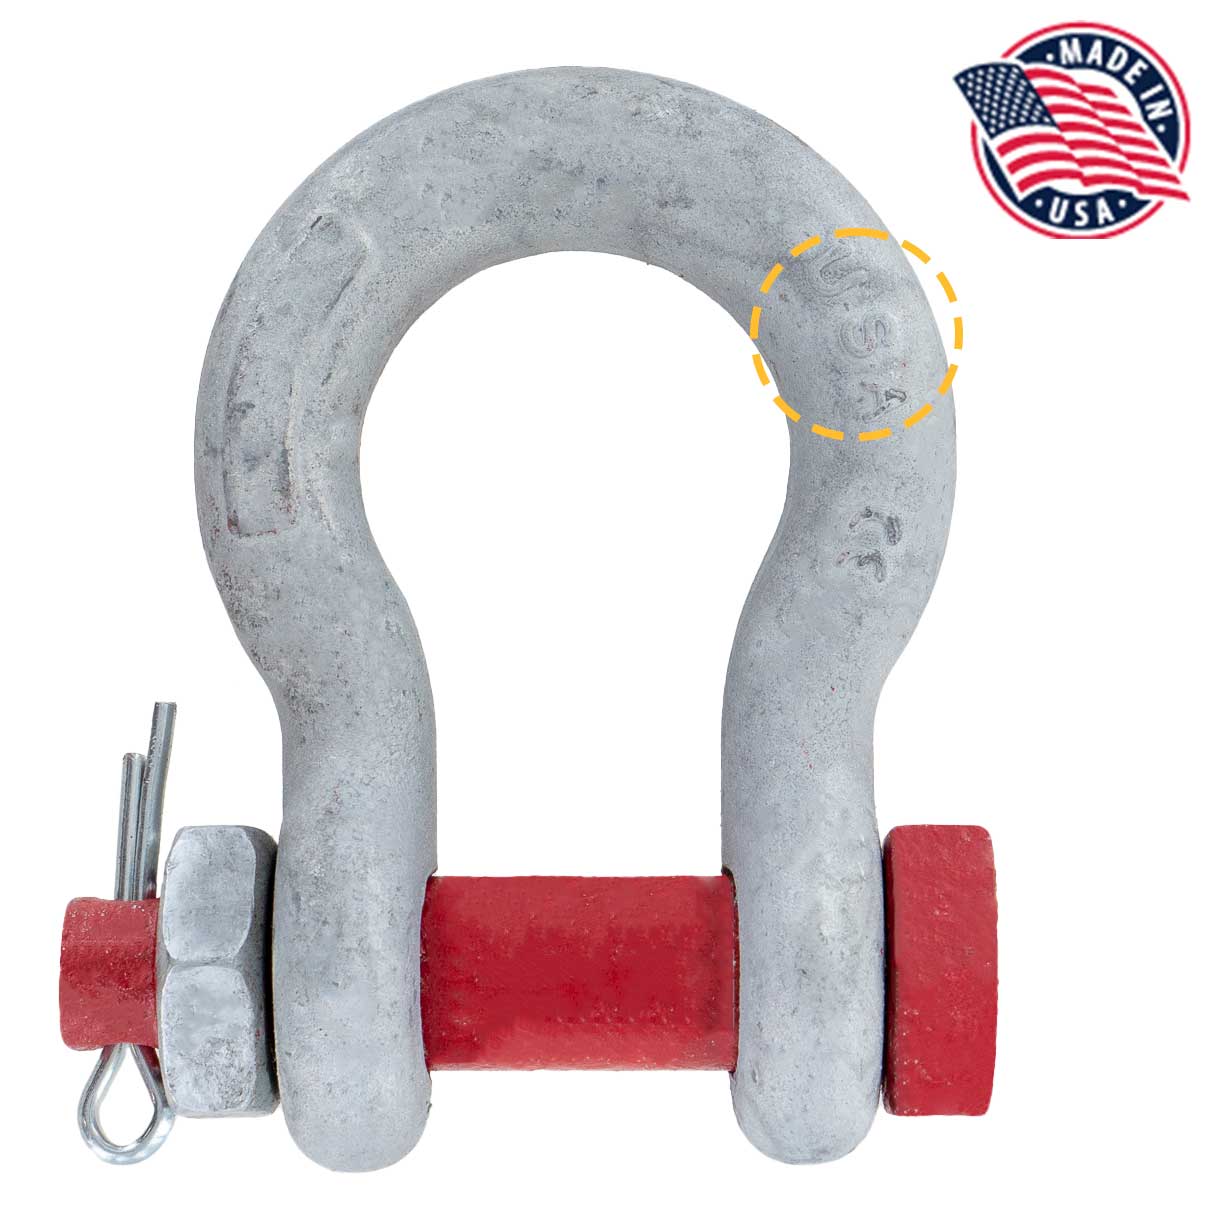 3/8" Crosby® Alloy Bolt Type Anchor Shackle | G-2140 - 2 Ton made in USA